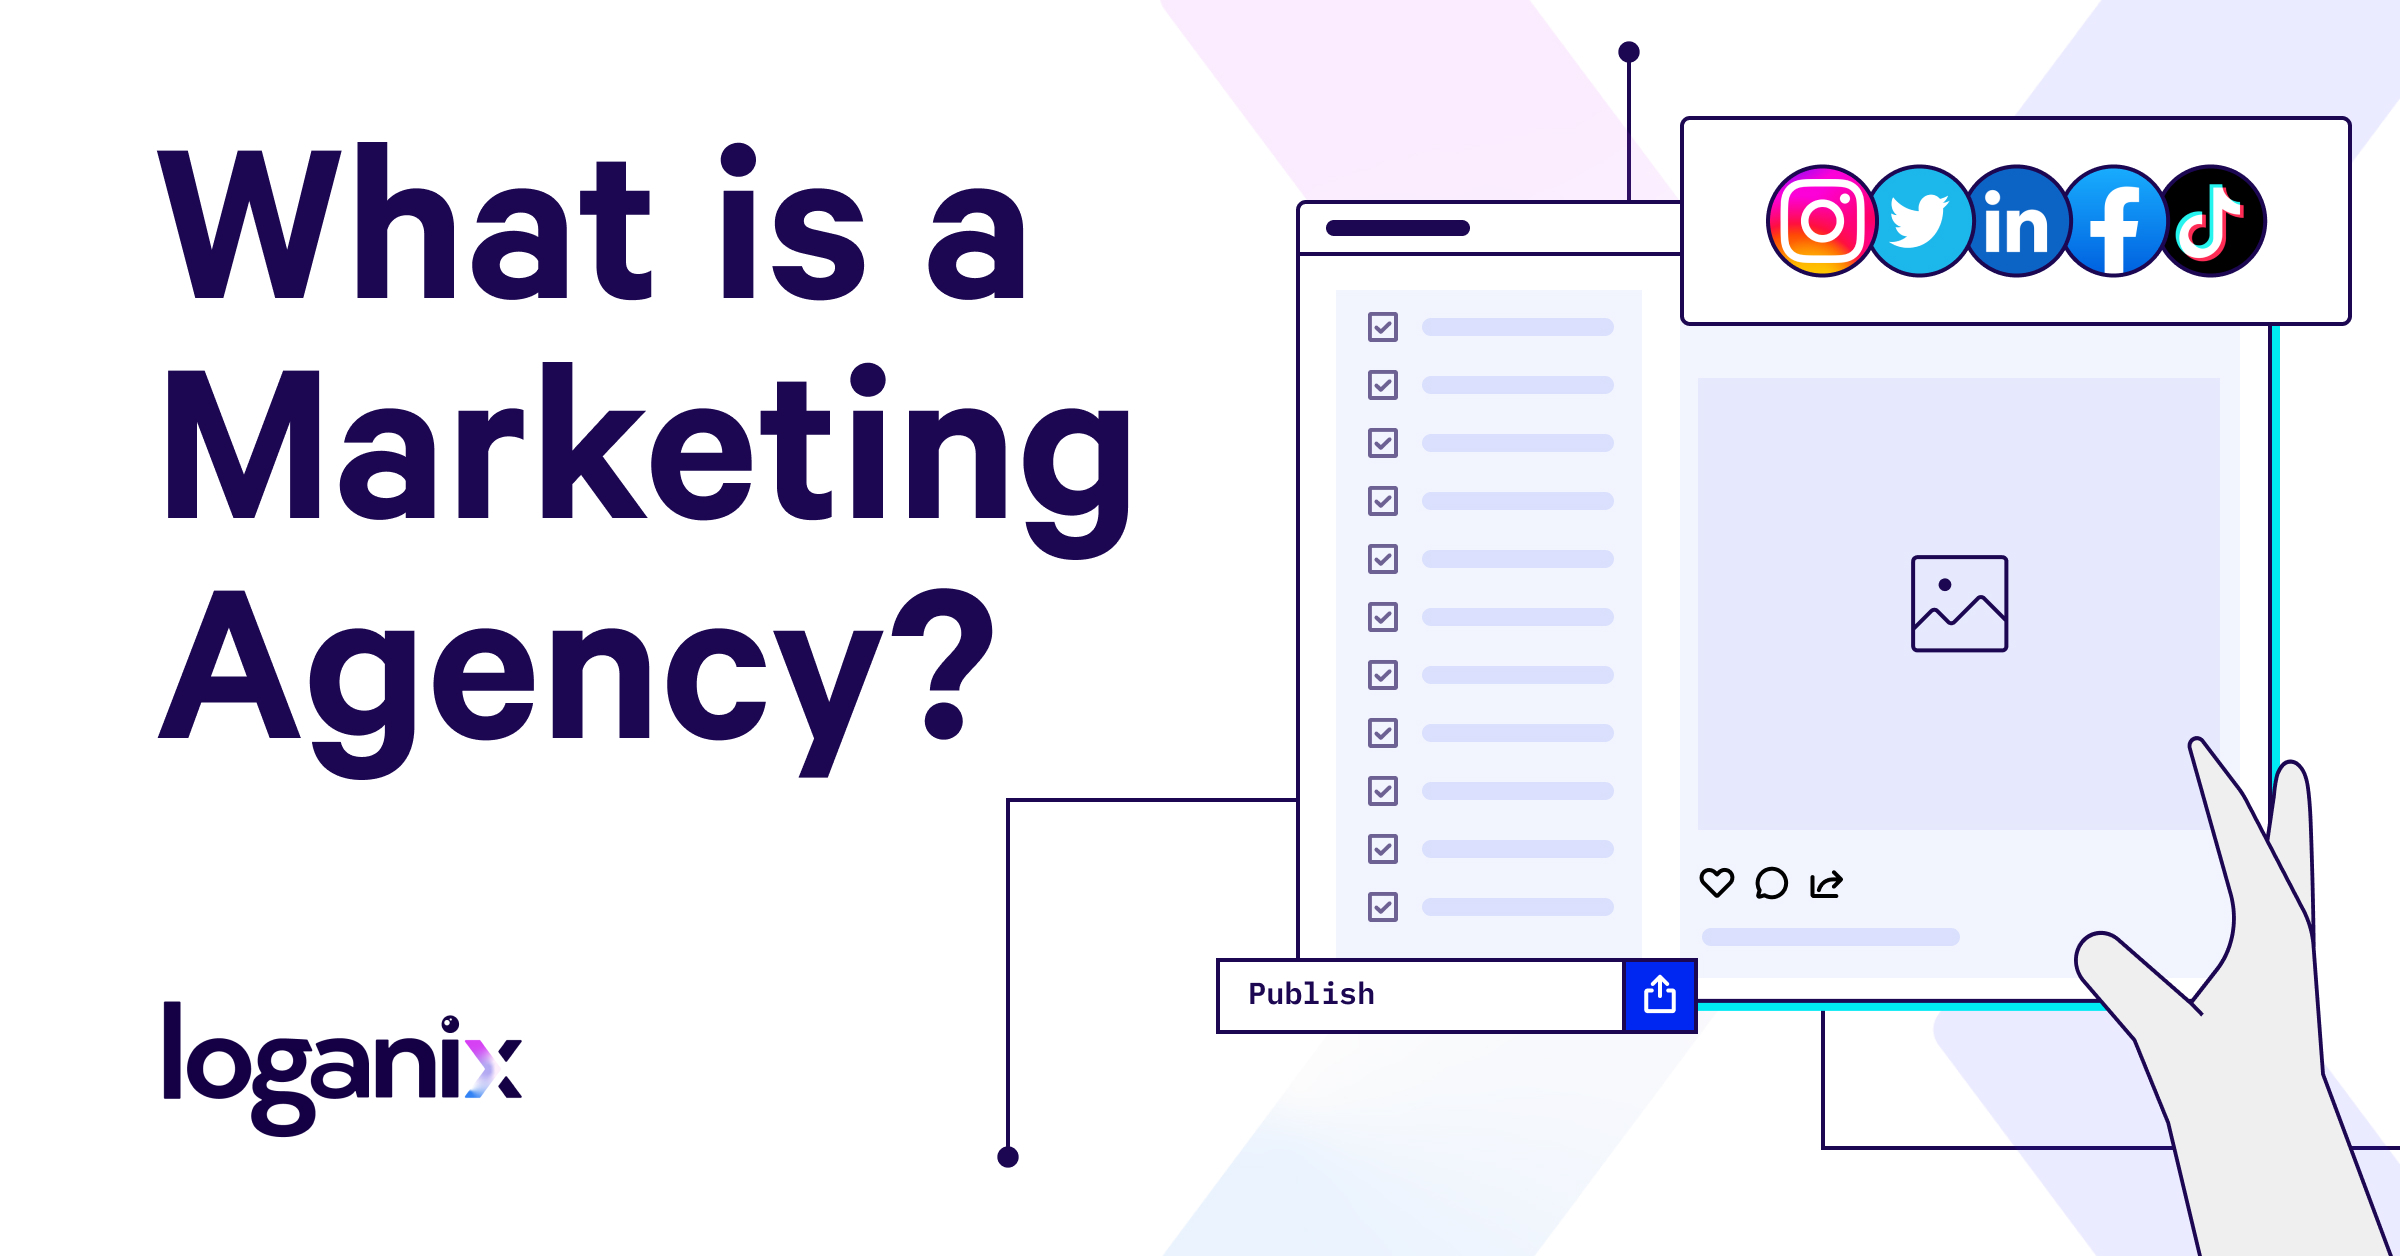 What is a Marketing Agency?